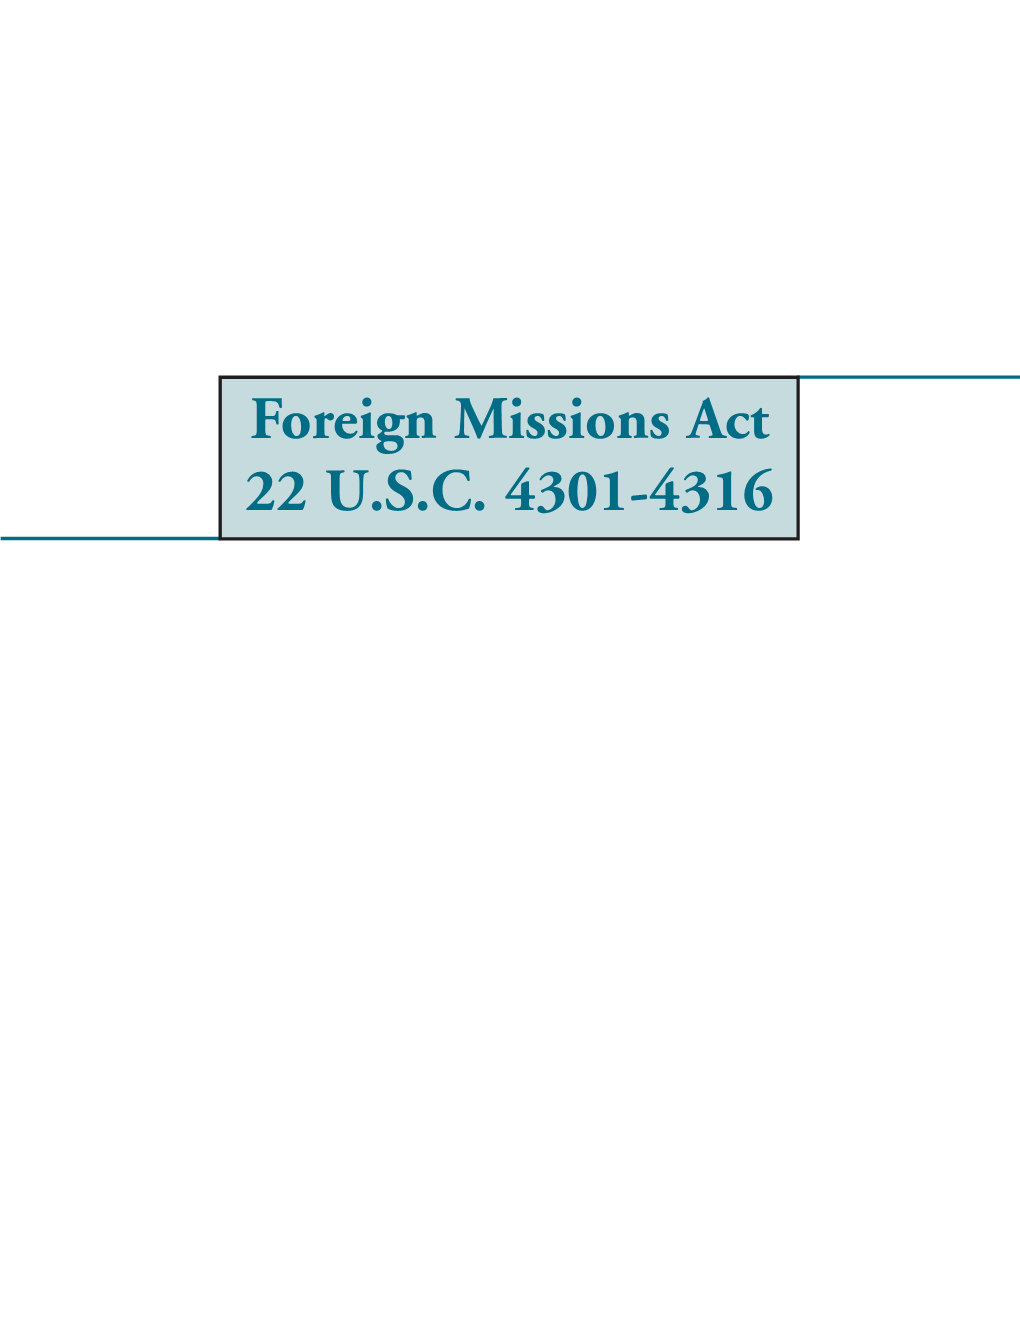 Foreign Missions Act 22 U.S.C. 4301-4316